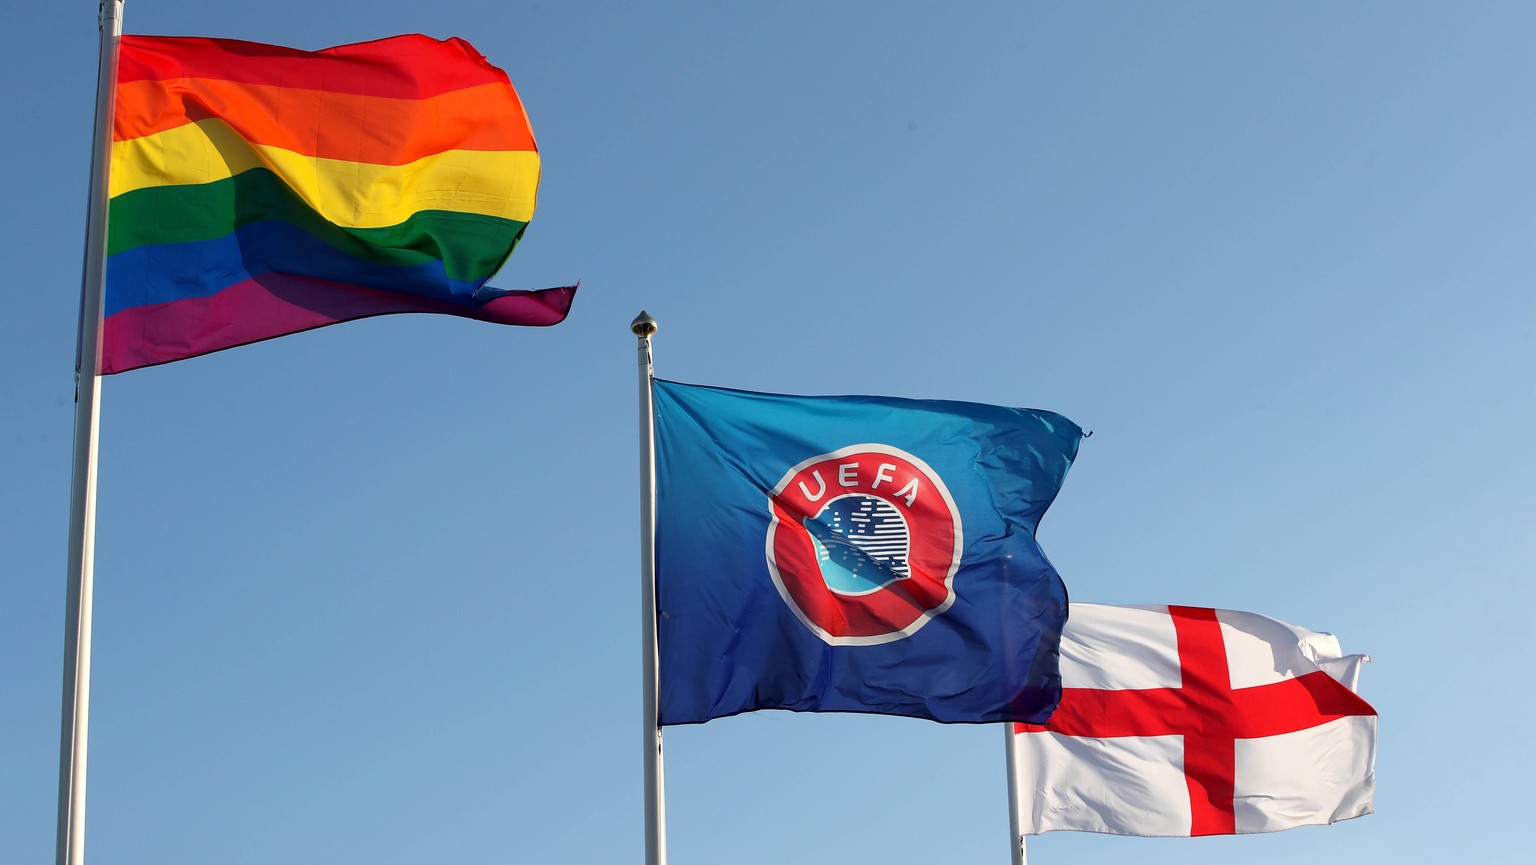 Birmingham City v Manchester City - FA Women s Super League - Sportnation.Bet Stadium The Rainbow, UEFA and England flags fly above St George’s Park. Picture date: Sunday February 28, 2021. EDITORIAL  ...